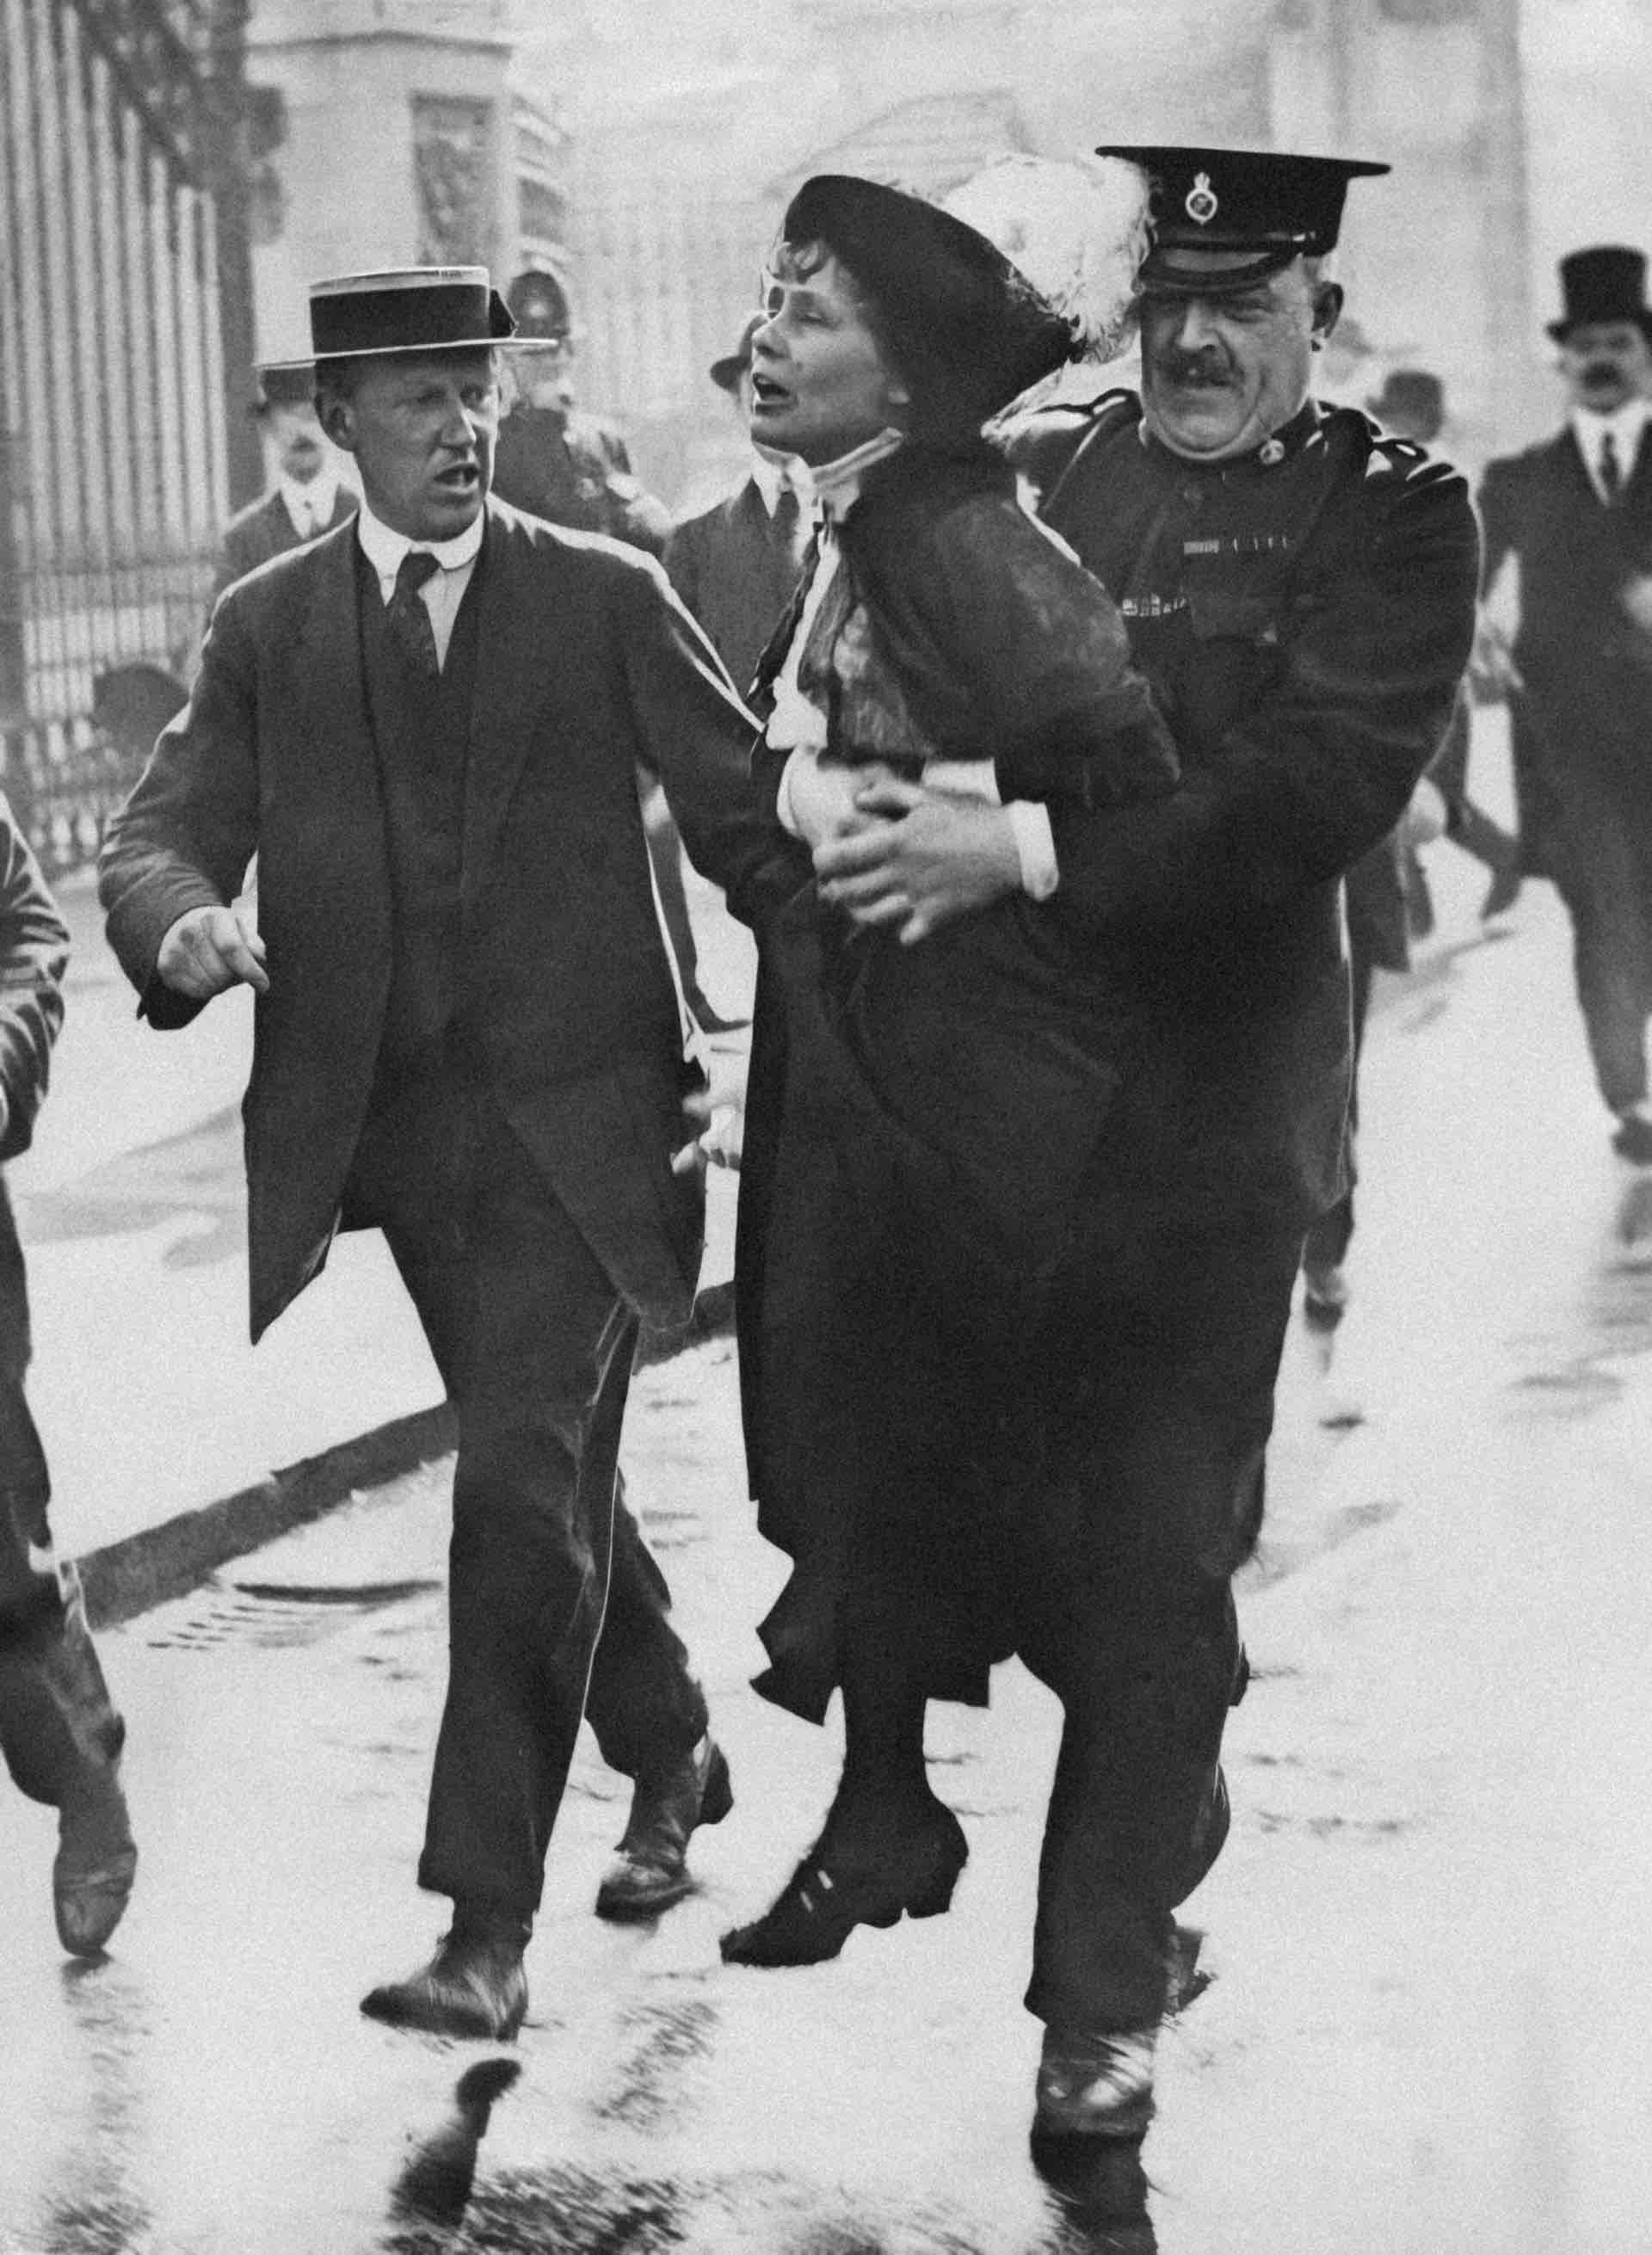 Historical black and white image of a Suffragette being arrested by a police officer